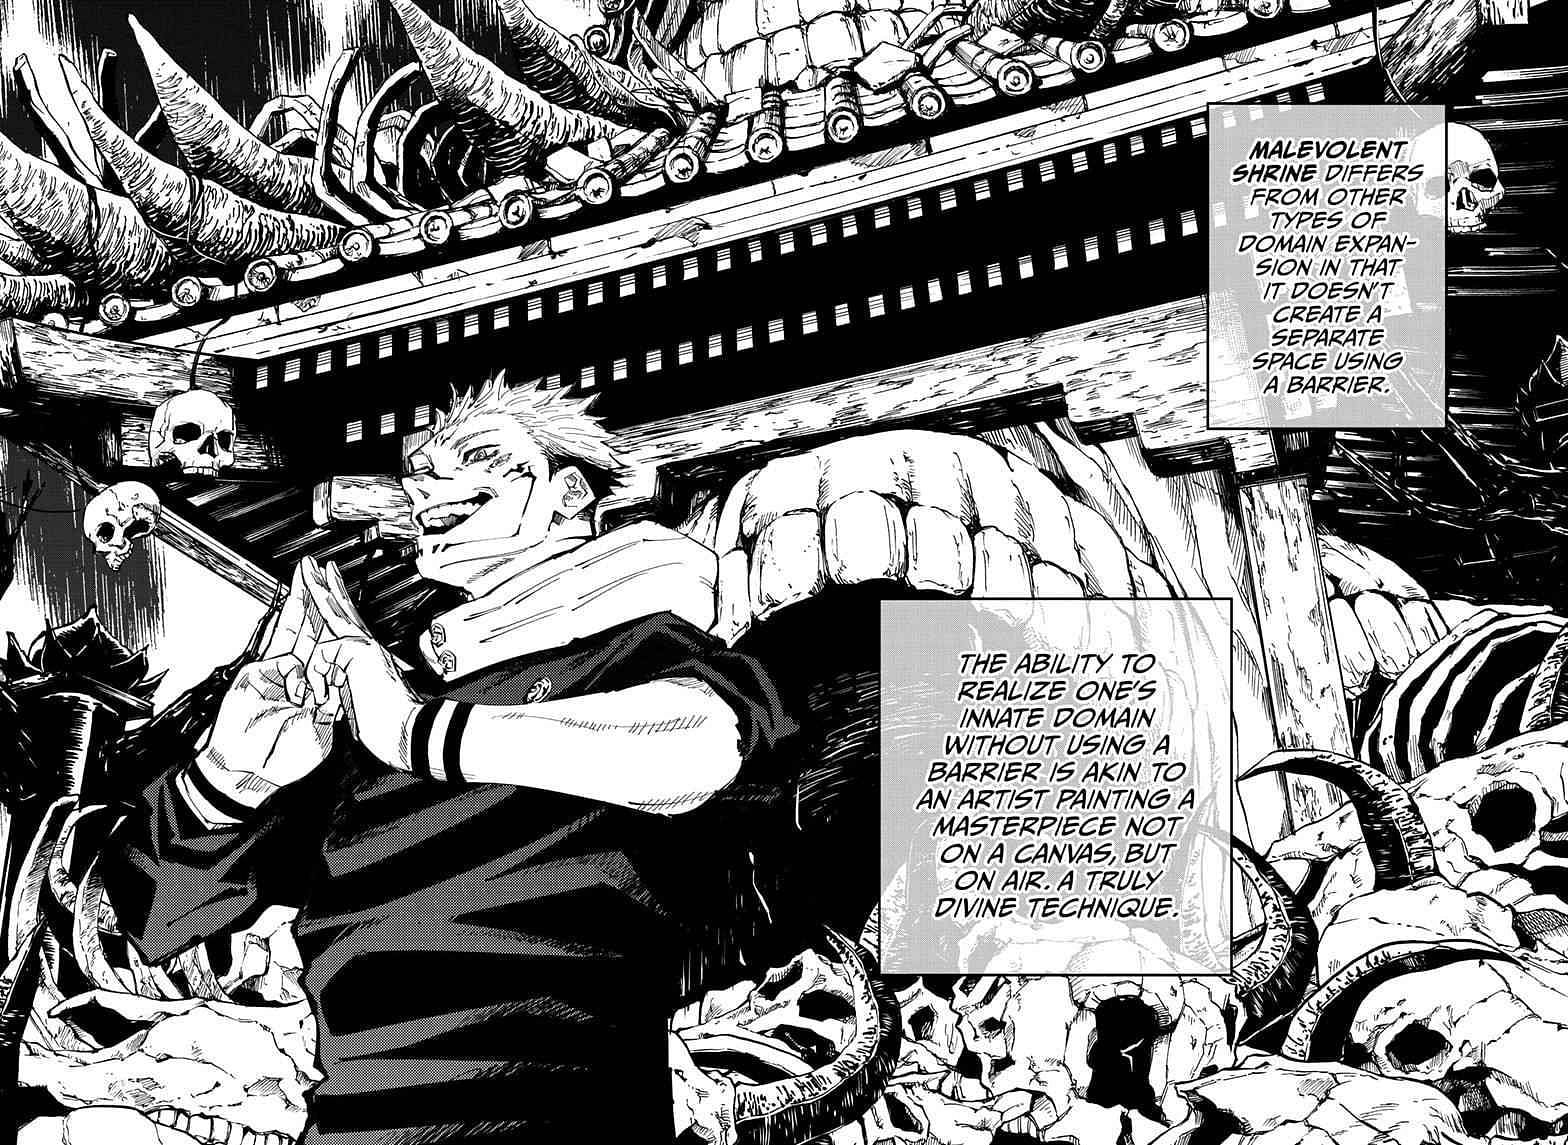 JJK leaker Jujutsu kaisen on X: Breaking: First tease of jujutsu kaisen  225 puts other sorcerers in the mix. 'The overwhelming battle between gojo  and sukuna and what about the other sorcerers